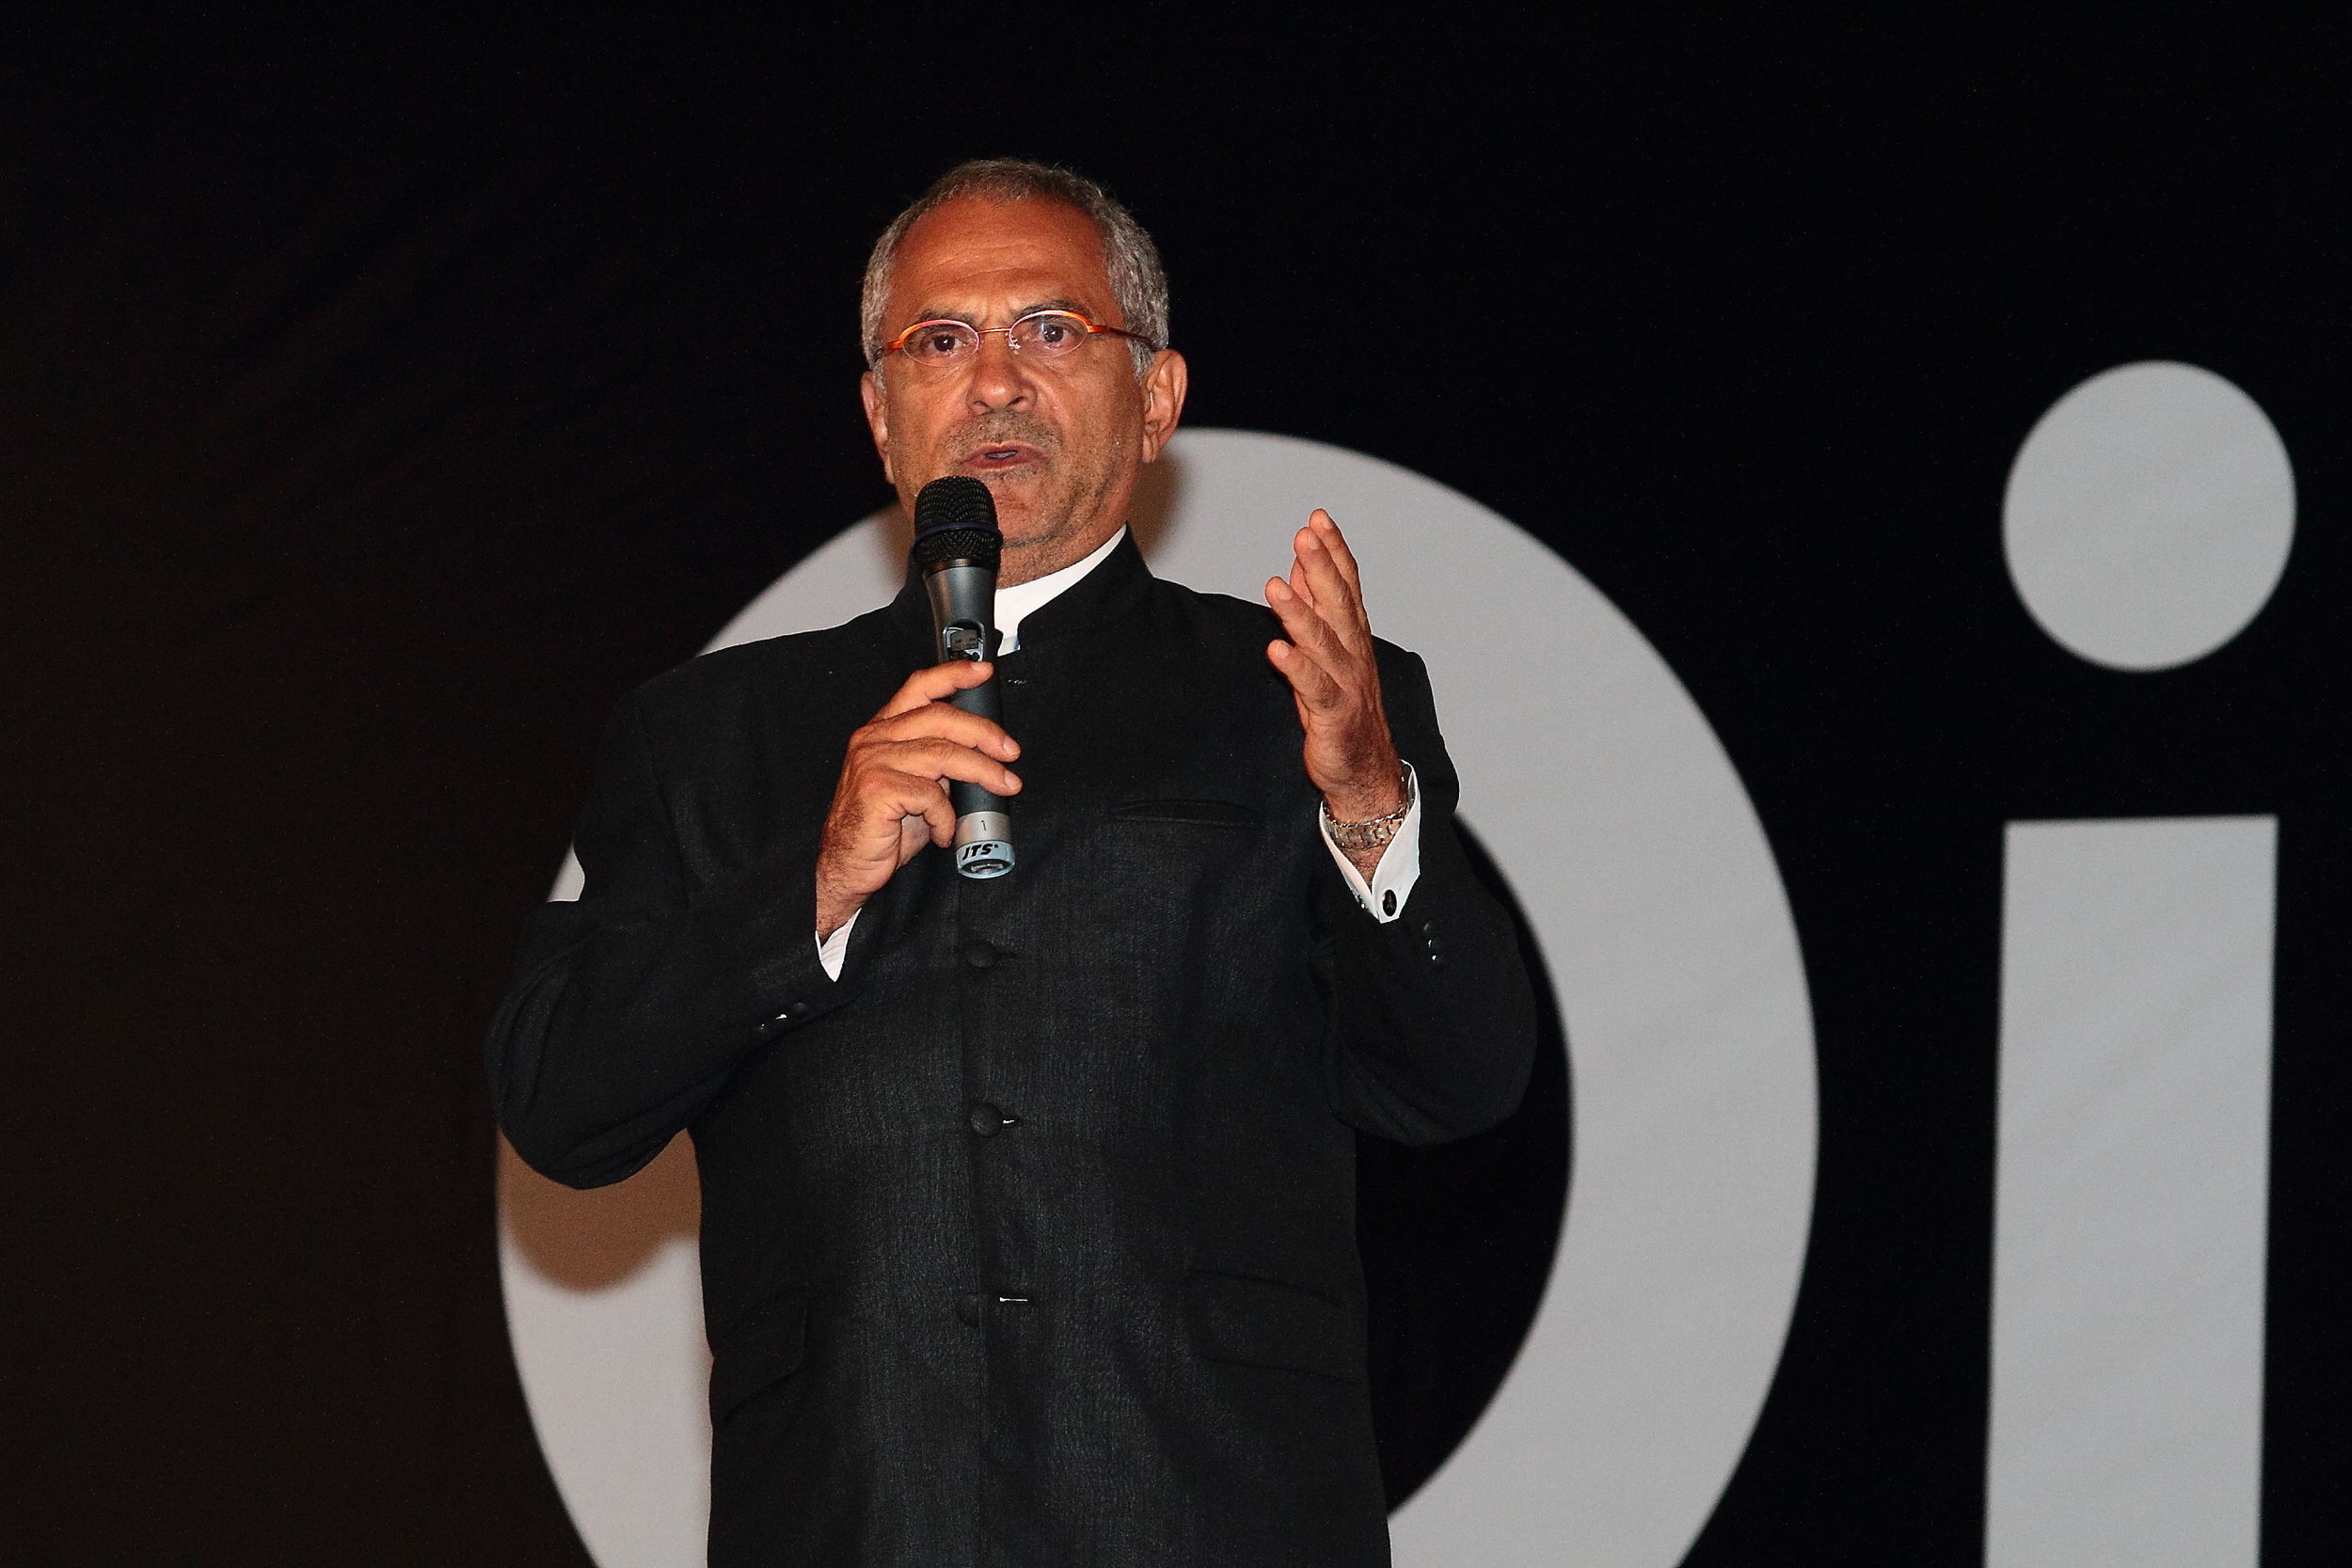 President Jose Ramos-Horta shares his thoughts on how new business models can have a positive impact on developing nations.